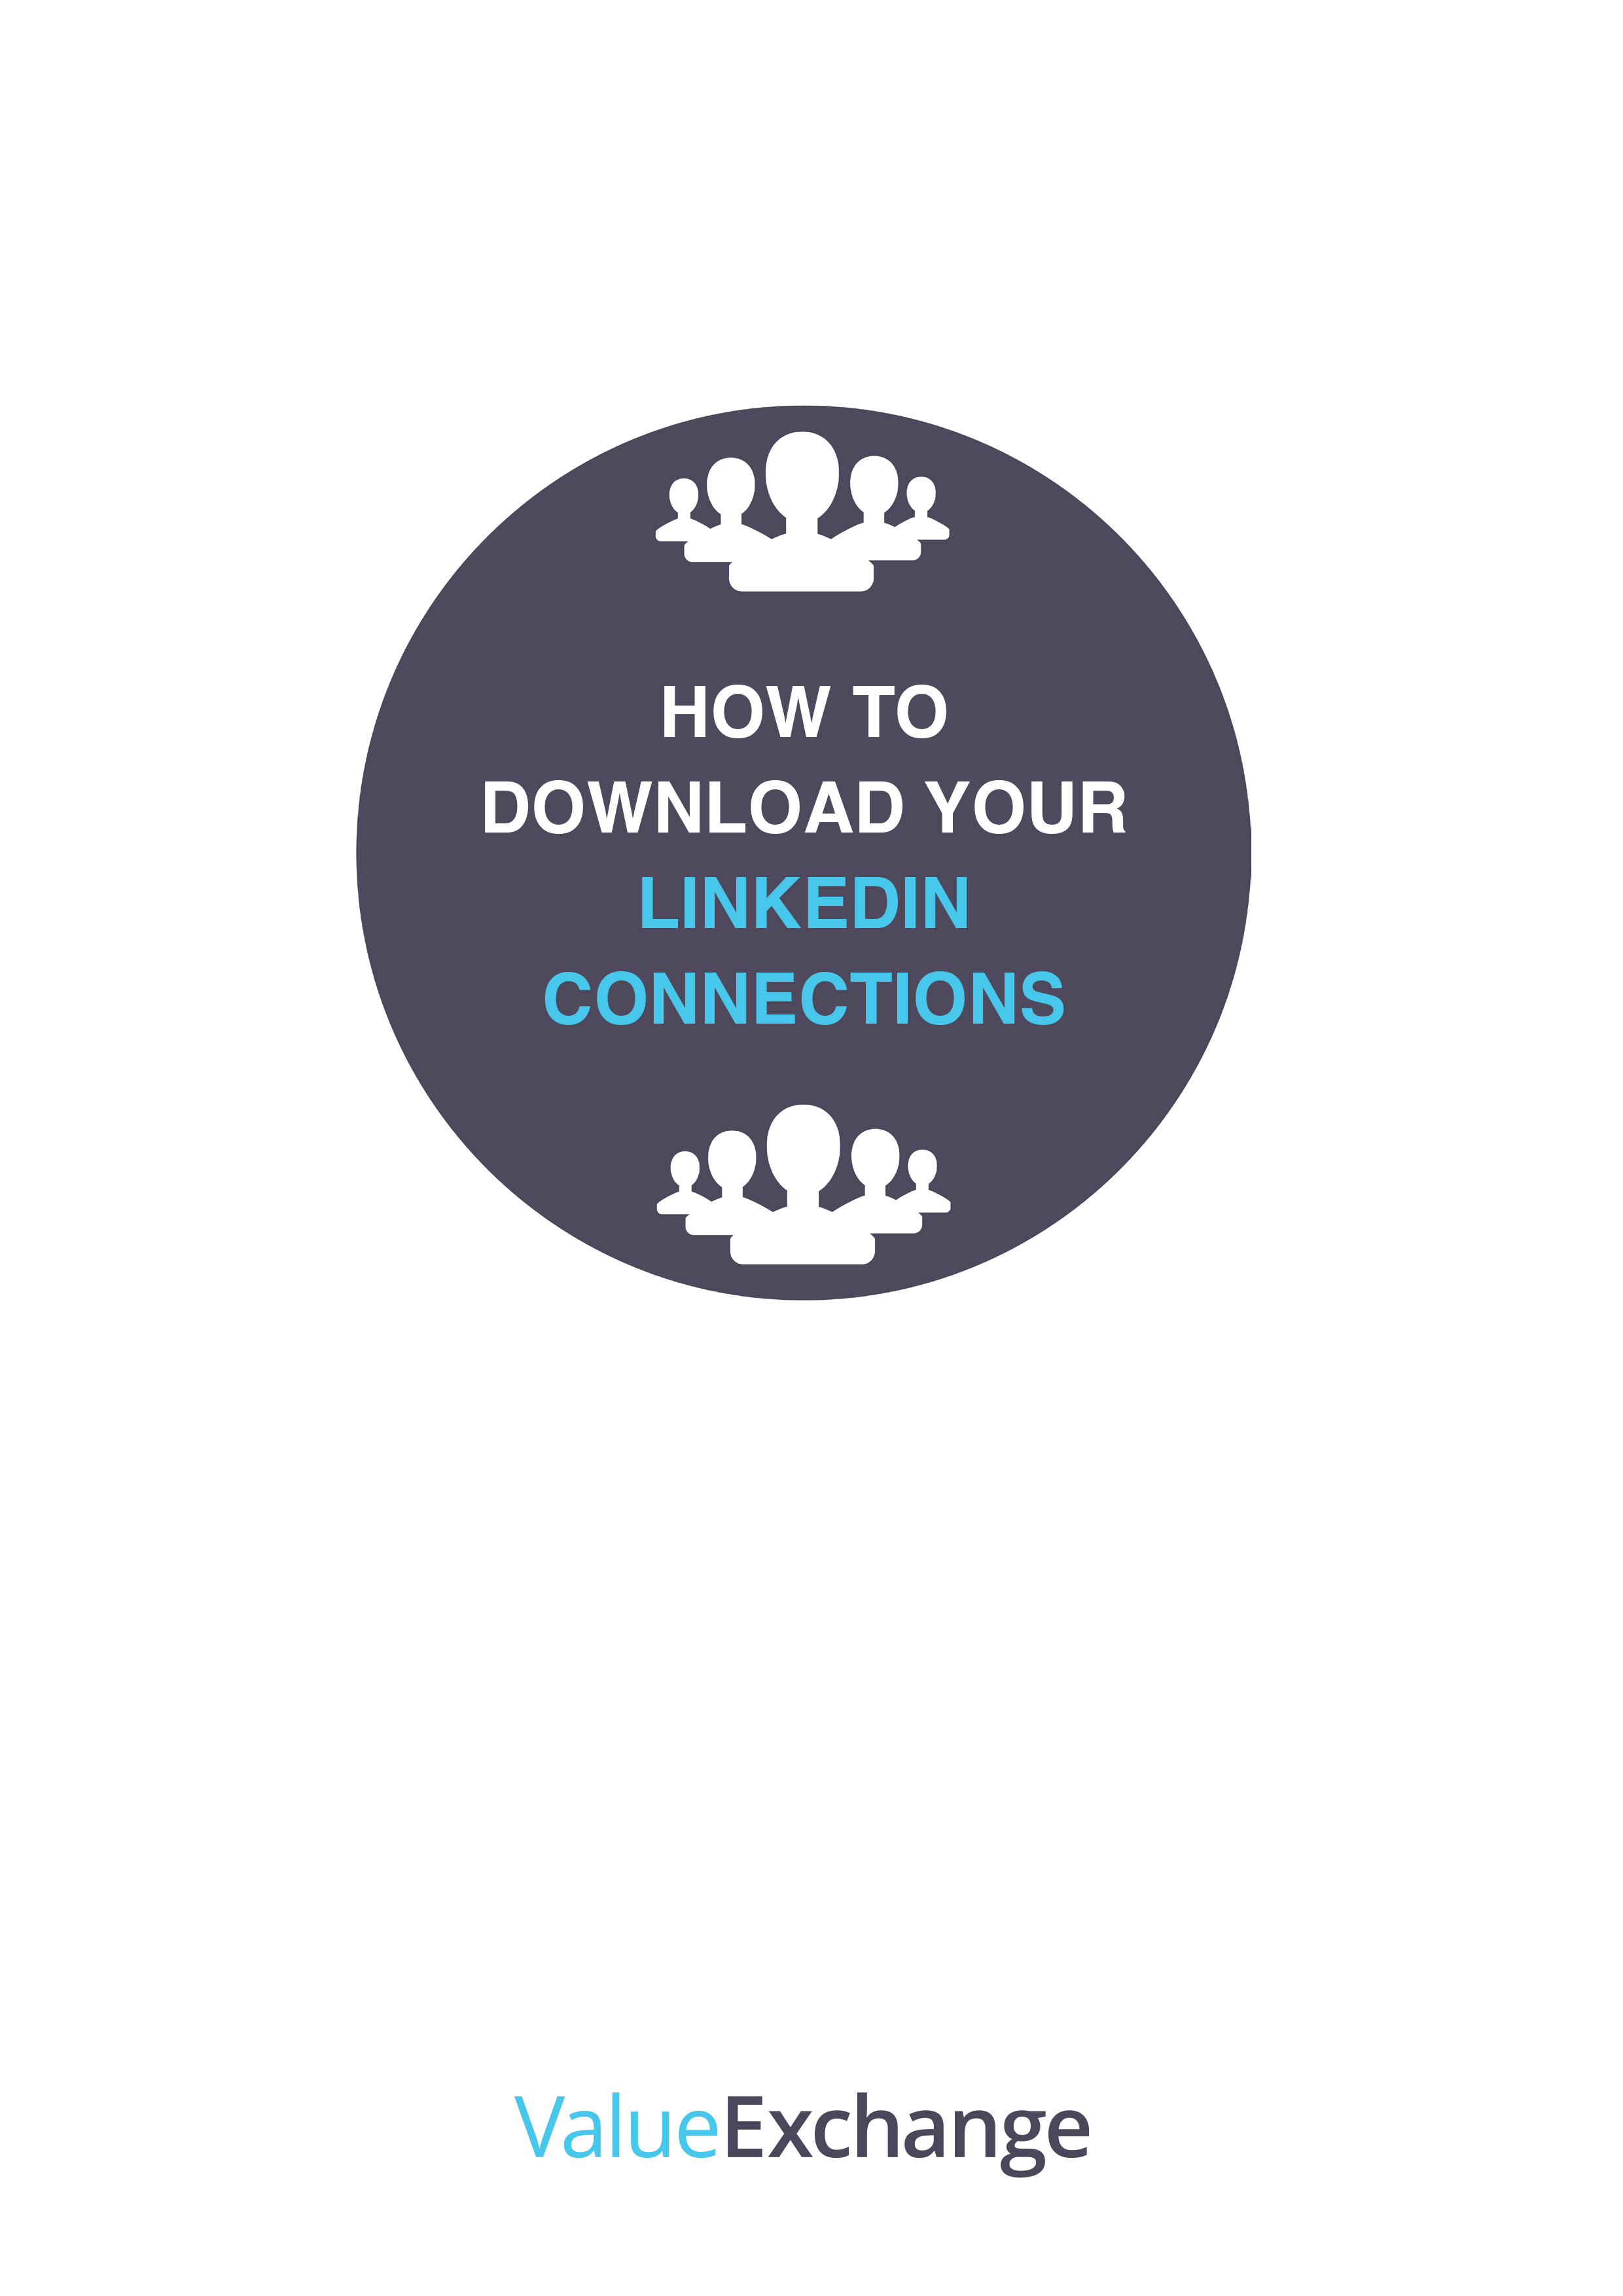 How to Download Your LinkedIn Connections by Nigel Cliffe